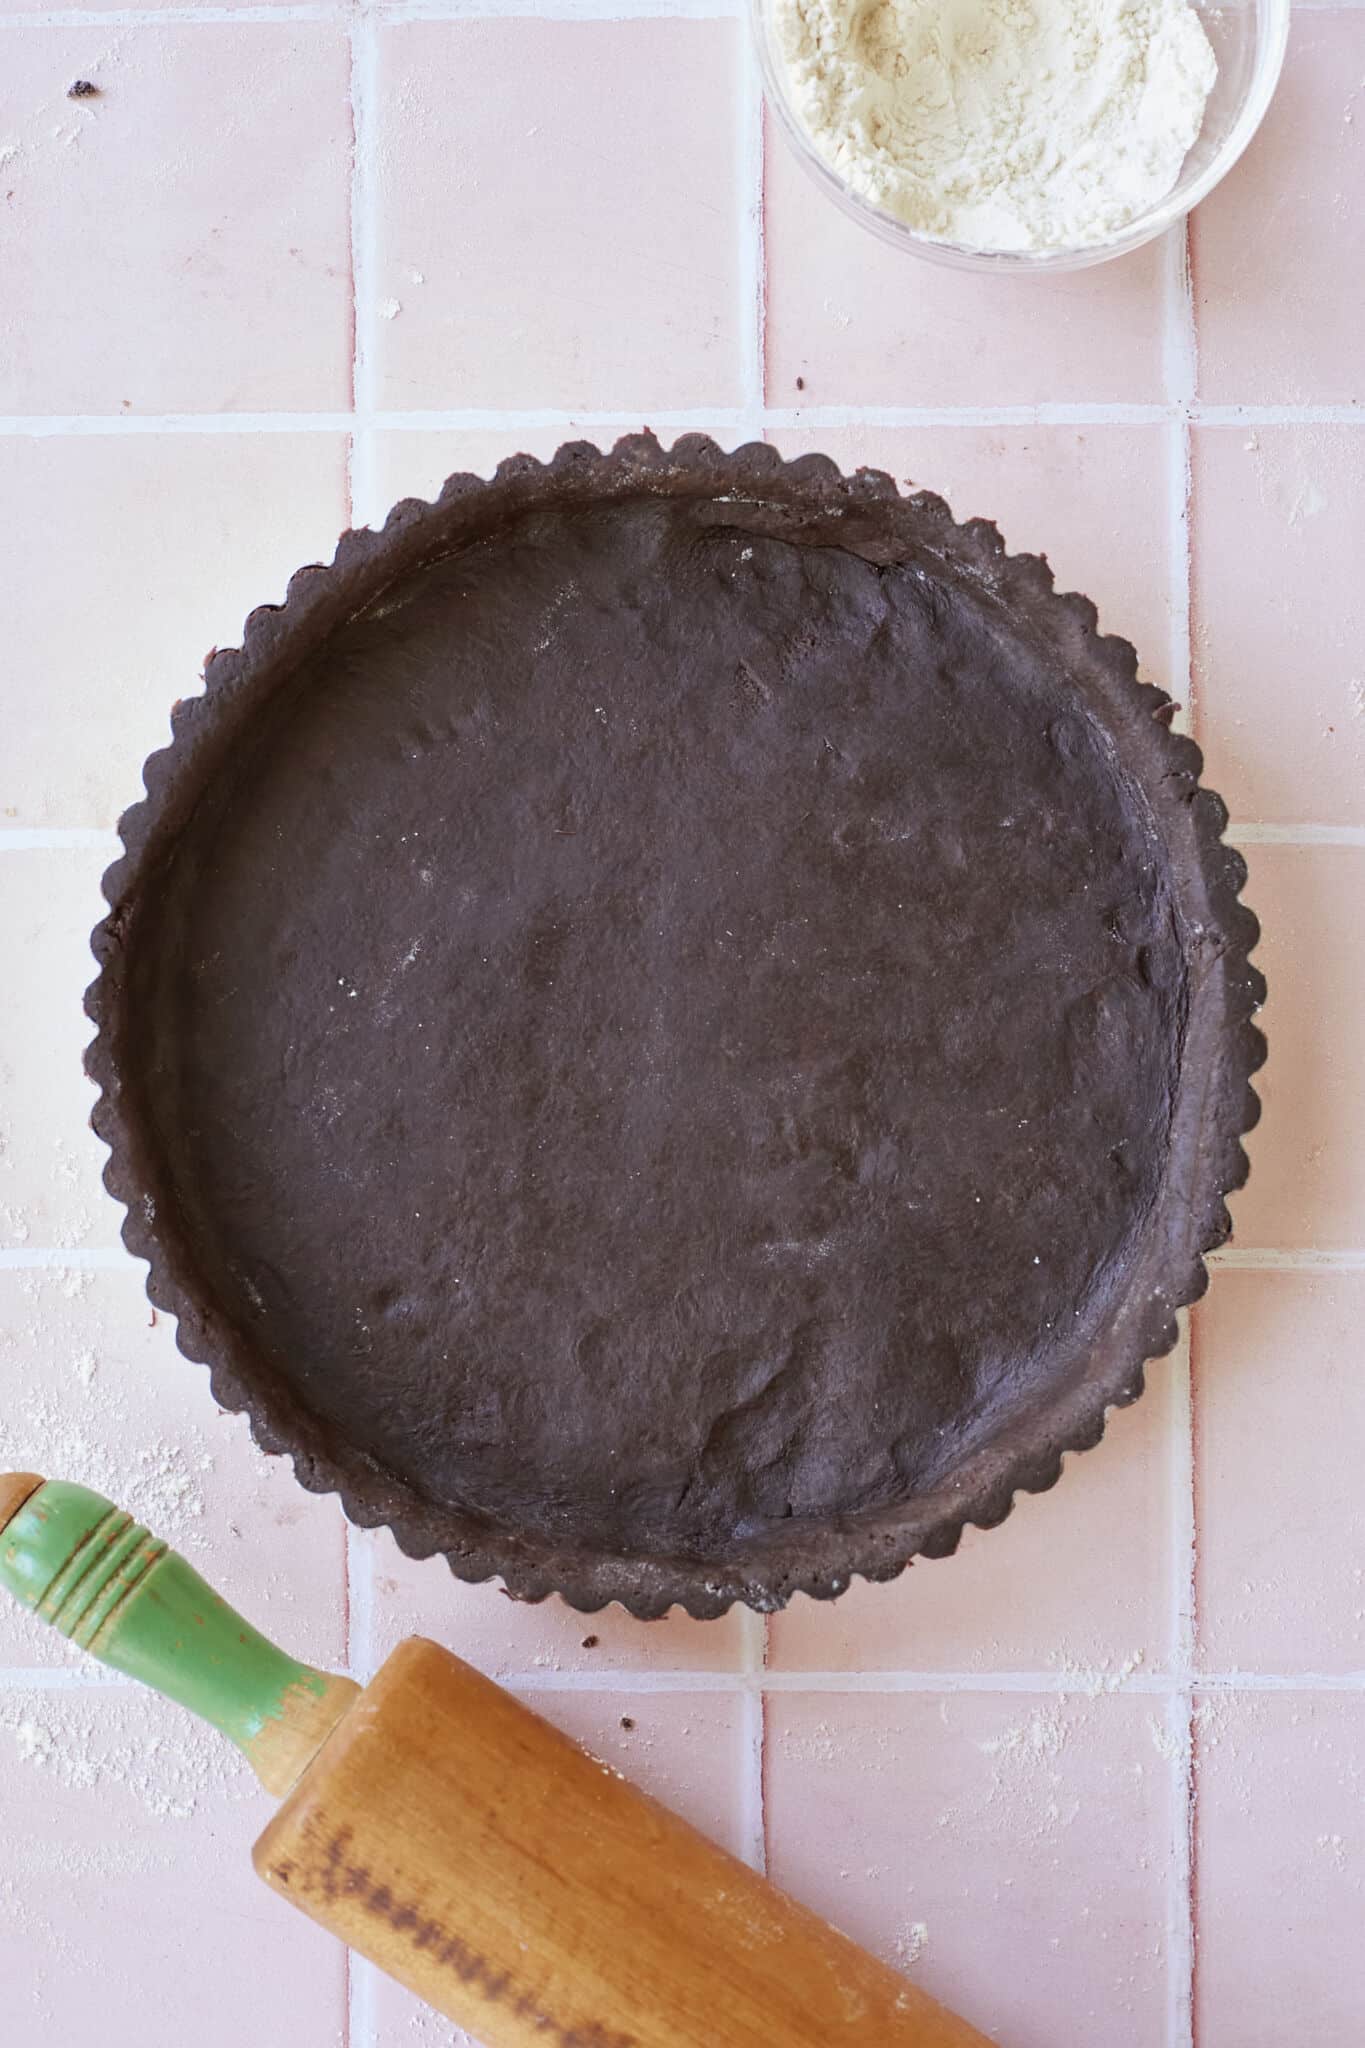 Chocolate Pastry is perfectly prepared in the fluted-edge pie pan. A wooden rolling pin is in the left bottom corner of the image and a small bowl of extra flour is in the top right corner. 